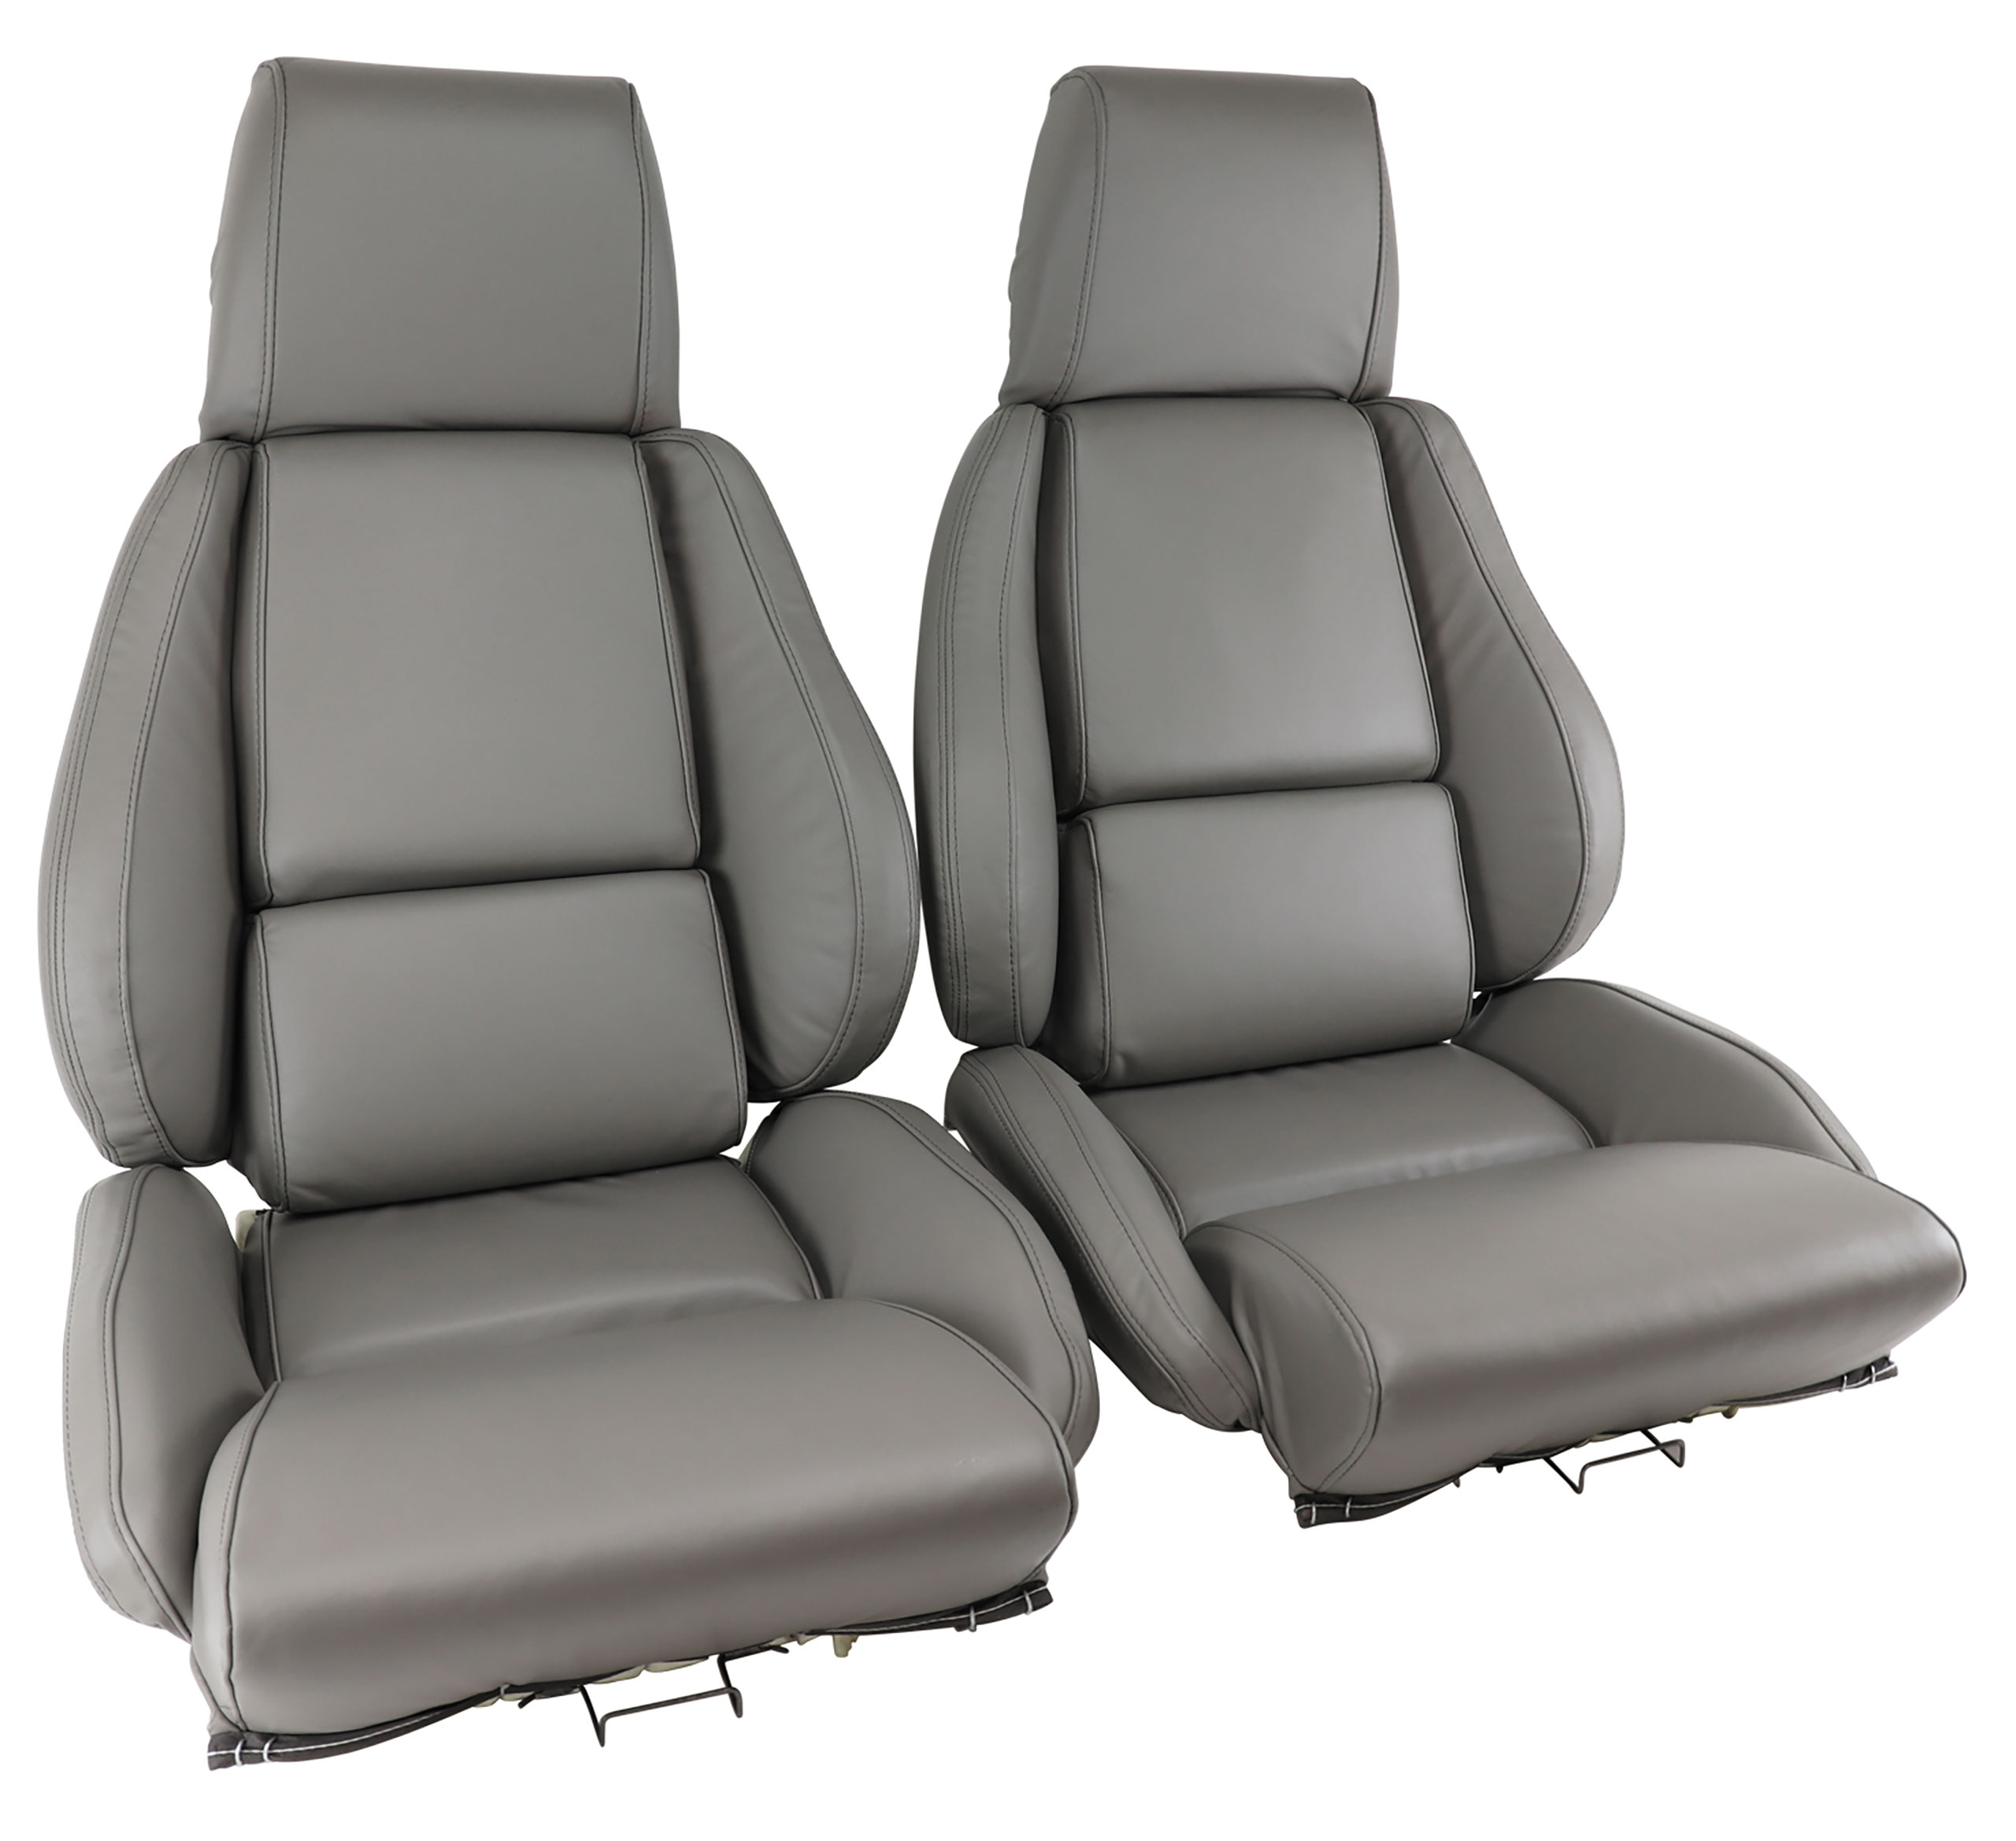 1988 C4 Corvette Mounted Leather Seat Covers Gray Standard No-Perforations